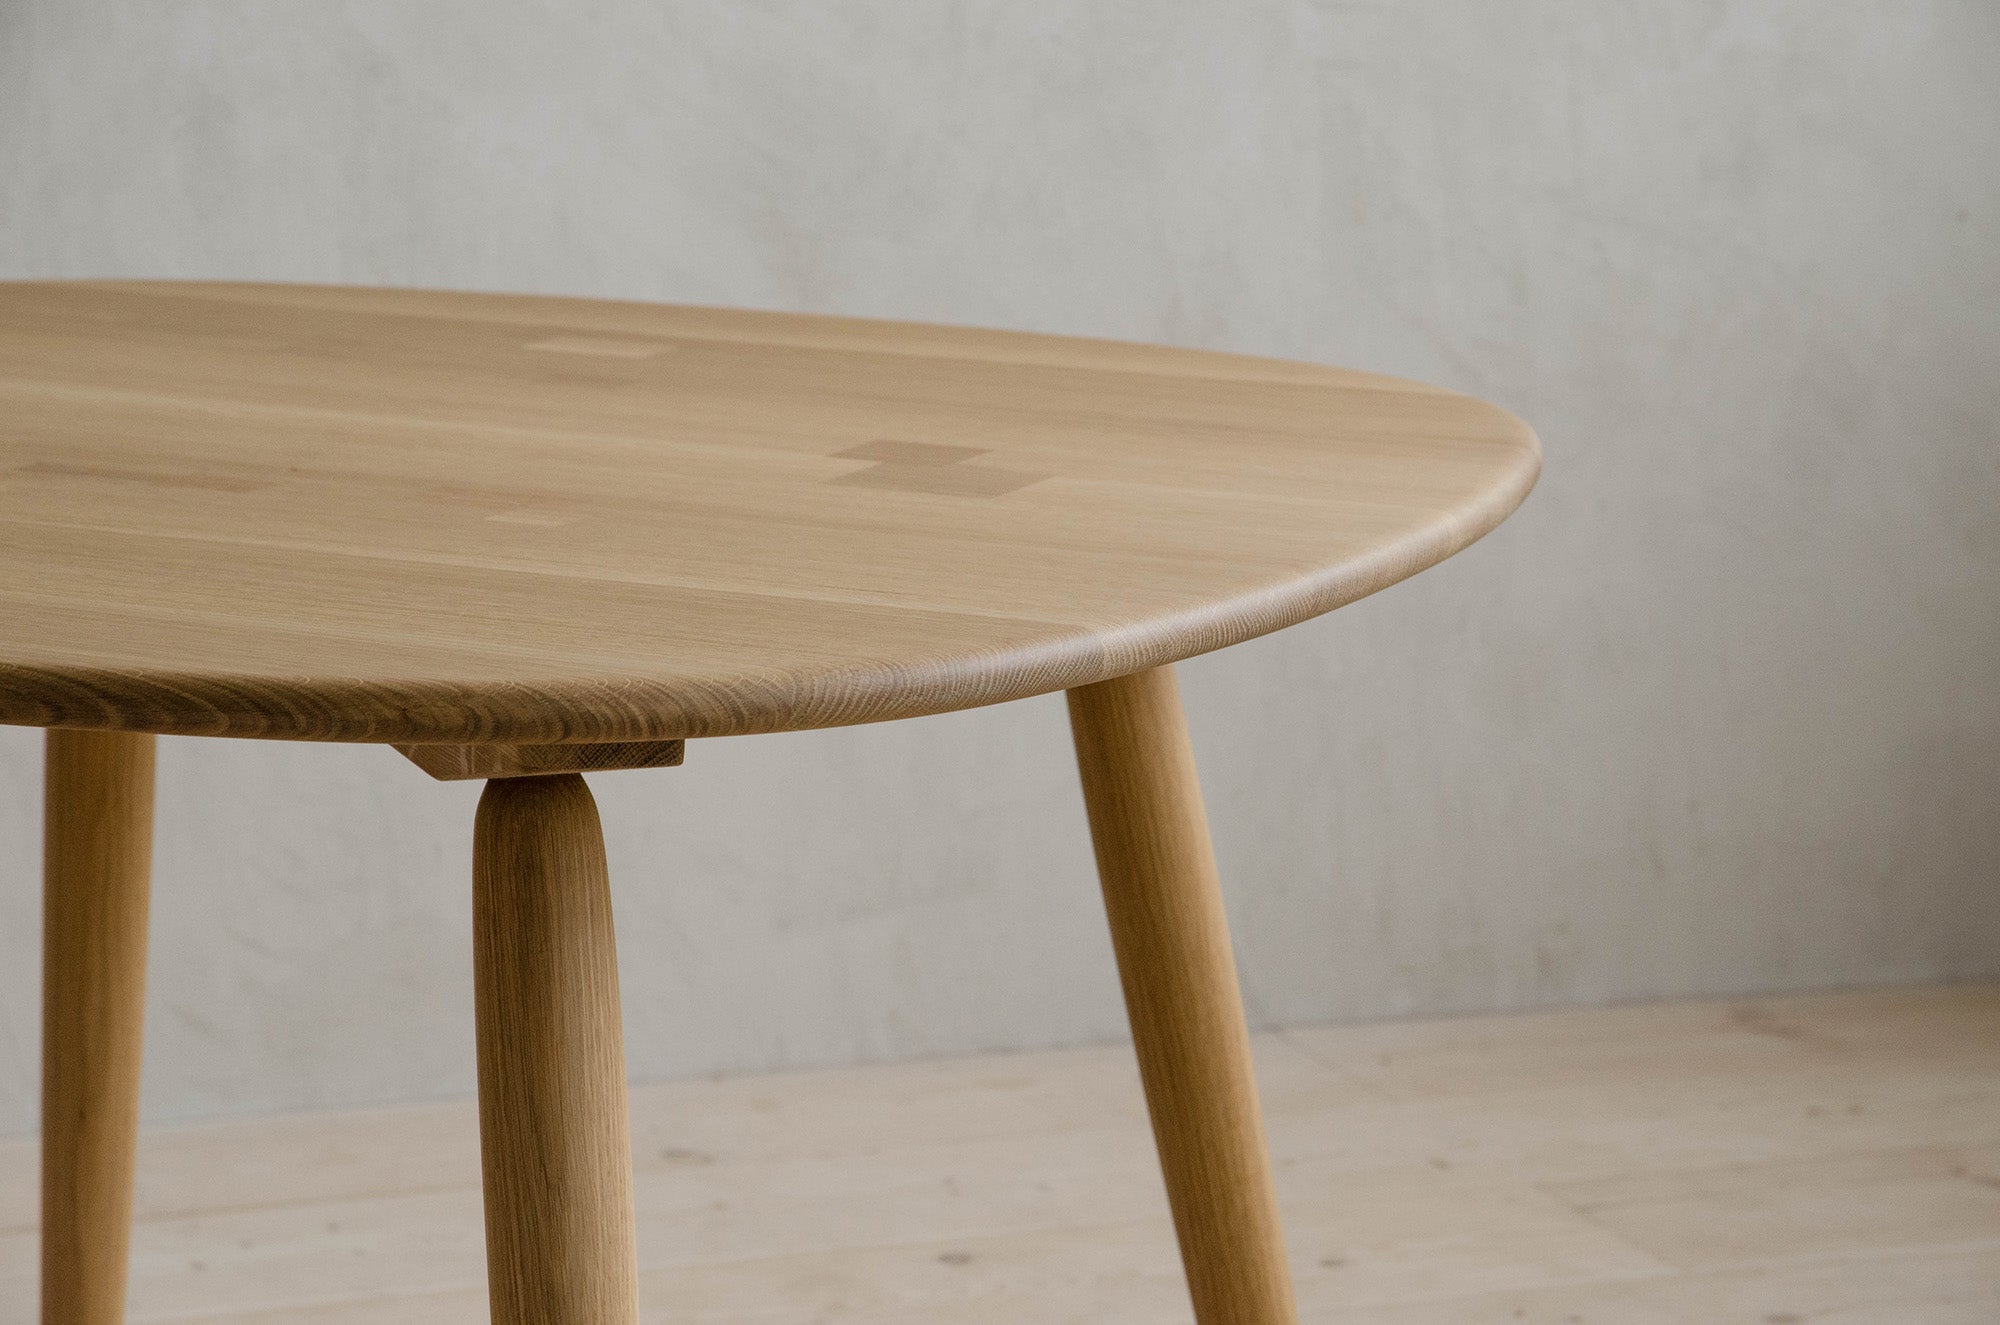 Nomad Round Dining Table